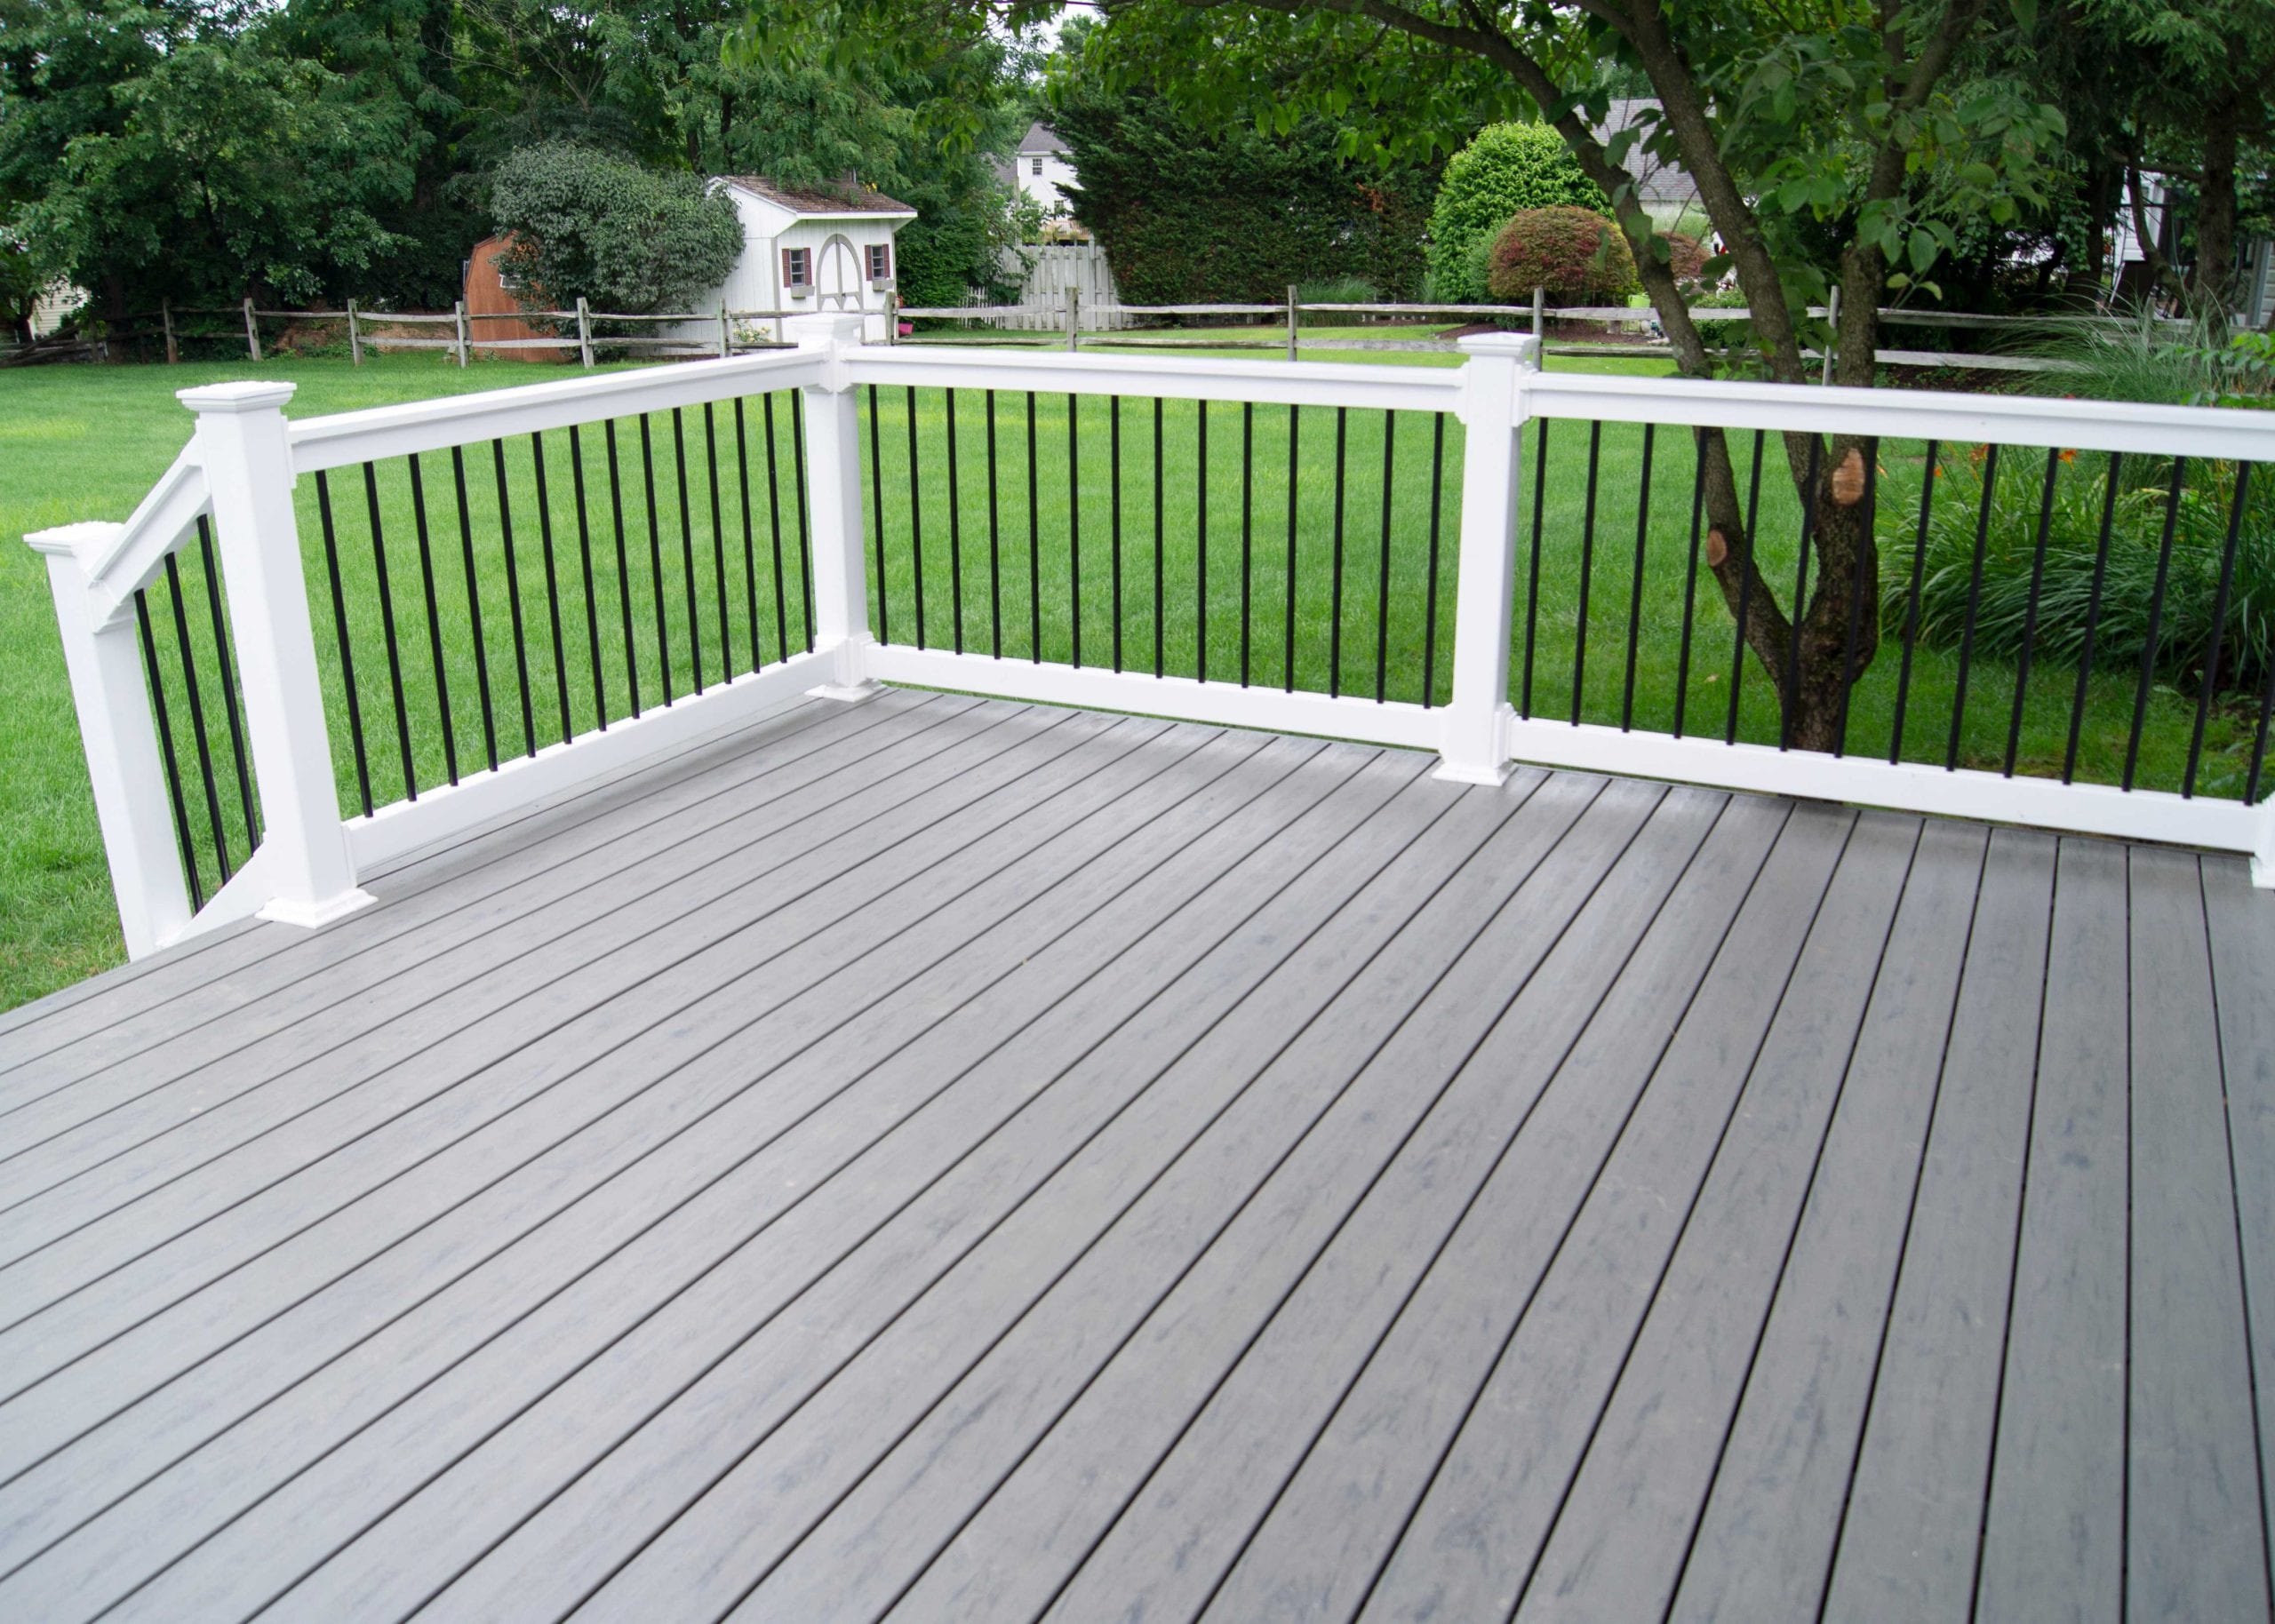 Find professional deck builders who specialize in deck railing and covers.